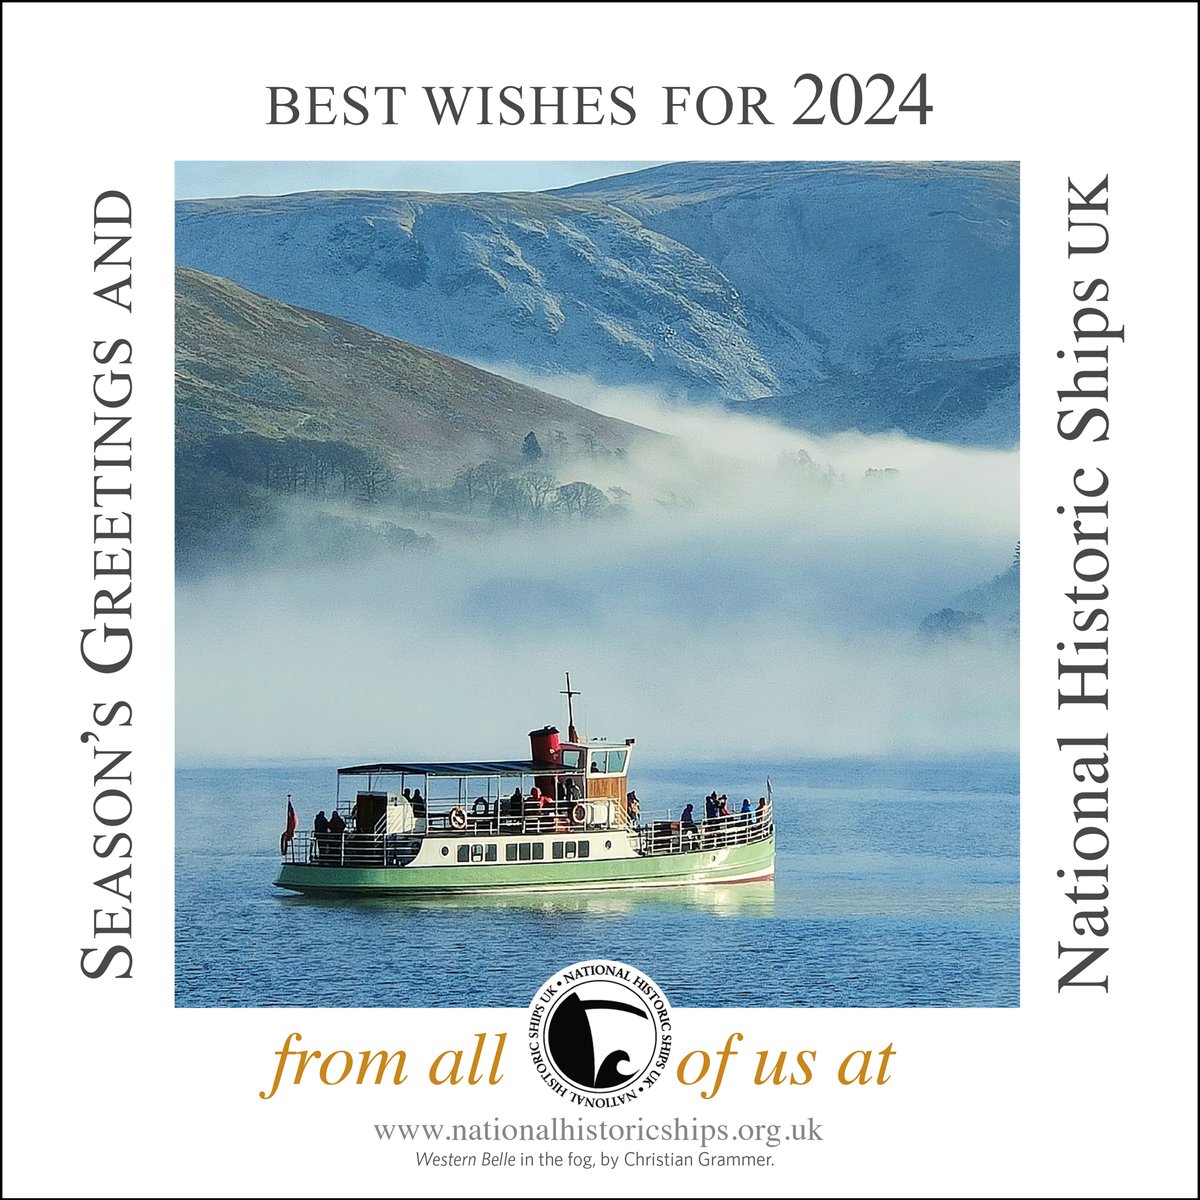 Season's Greetings and Best Wishes for 2024 from all of us at @nathistships! The team are now taking a well-deserved break, and will be back in the office on Tuesday 2nd January.